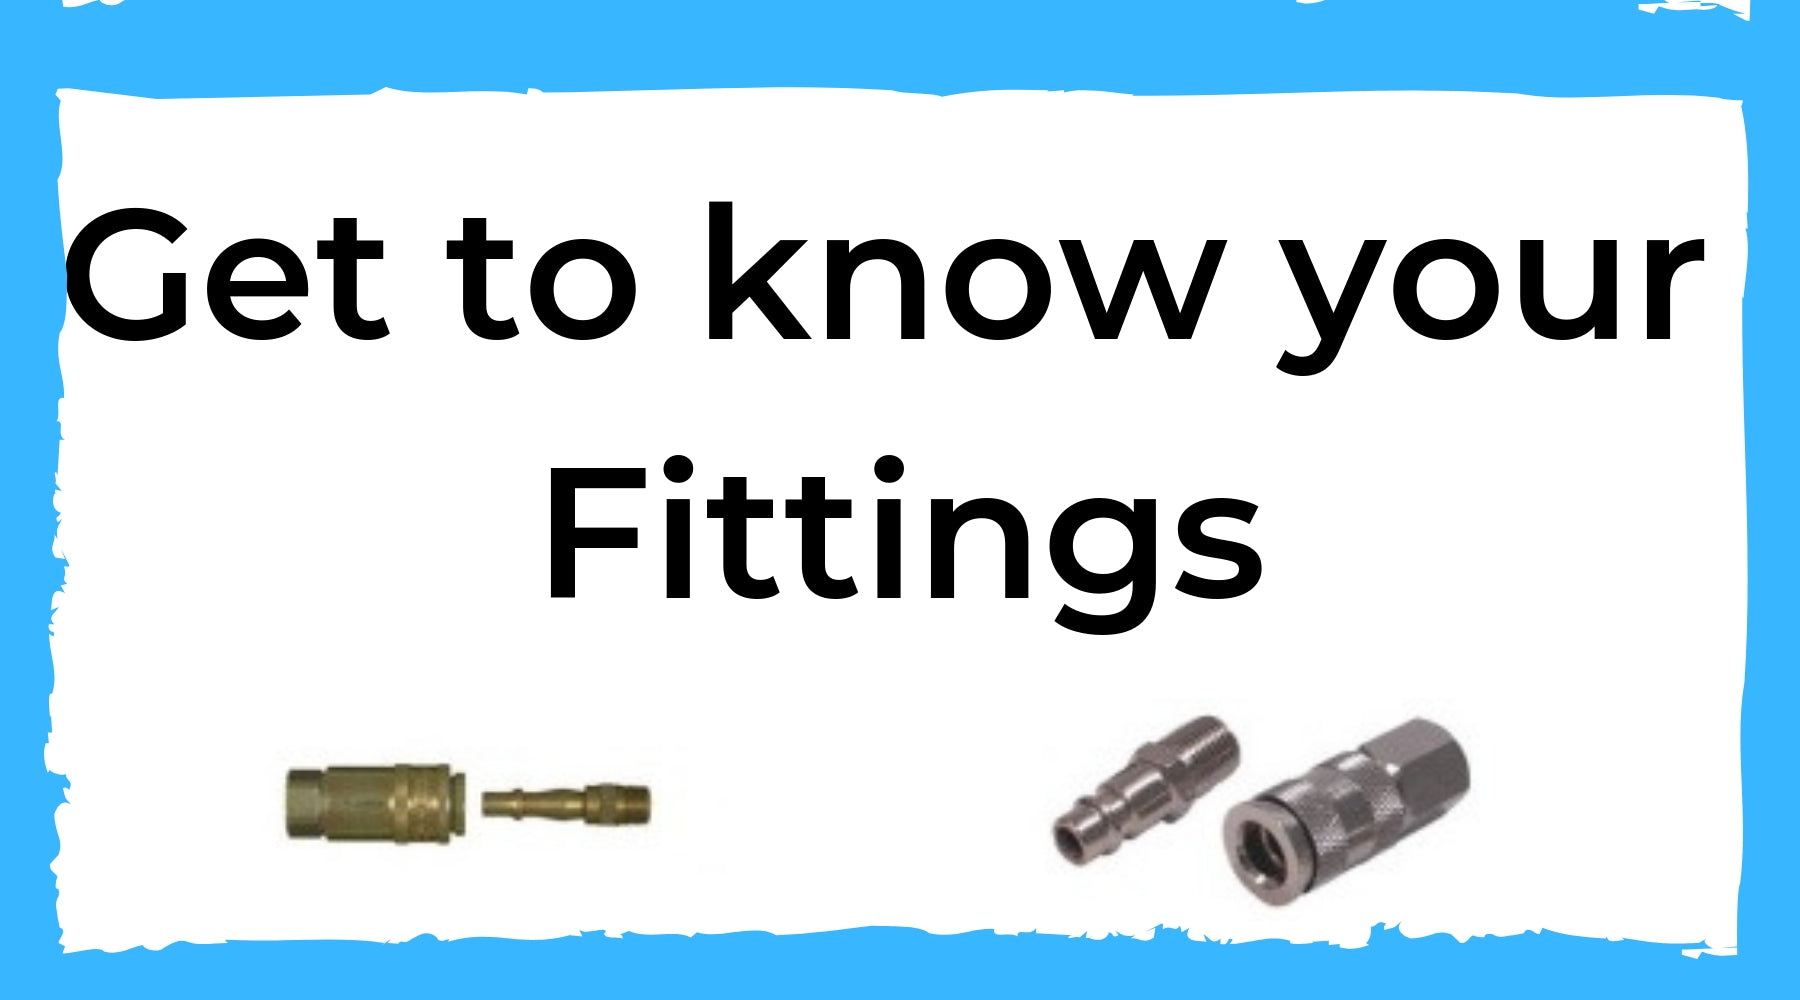 Plumbing Fittings:13 Types Of Plumbing Fittings Explained With Pictures